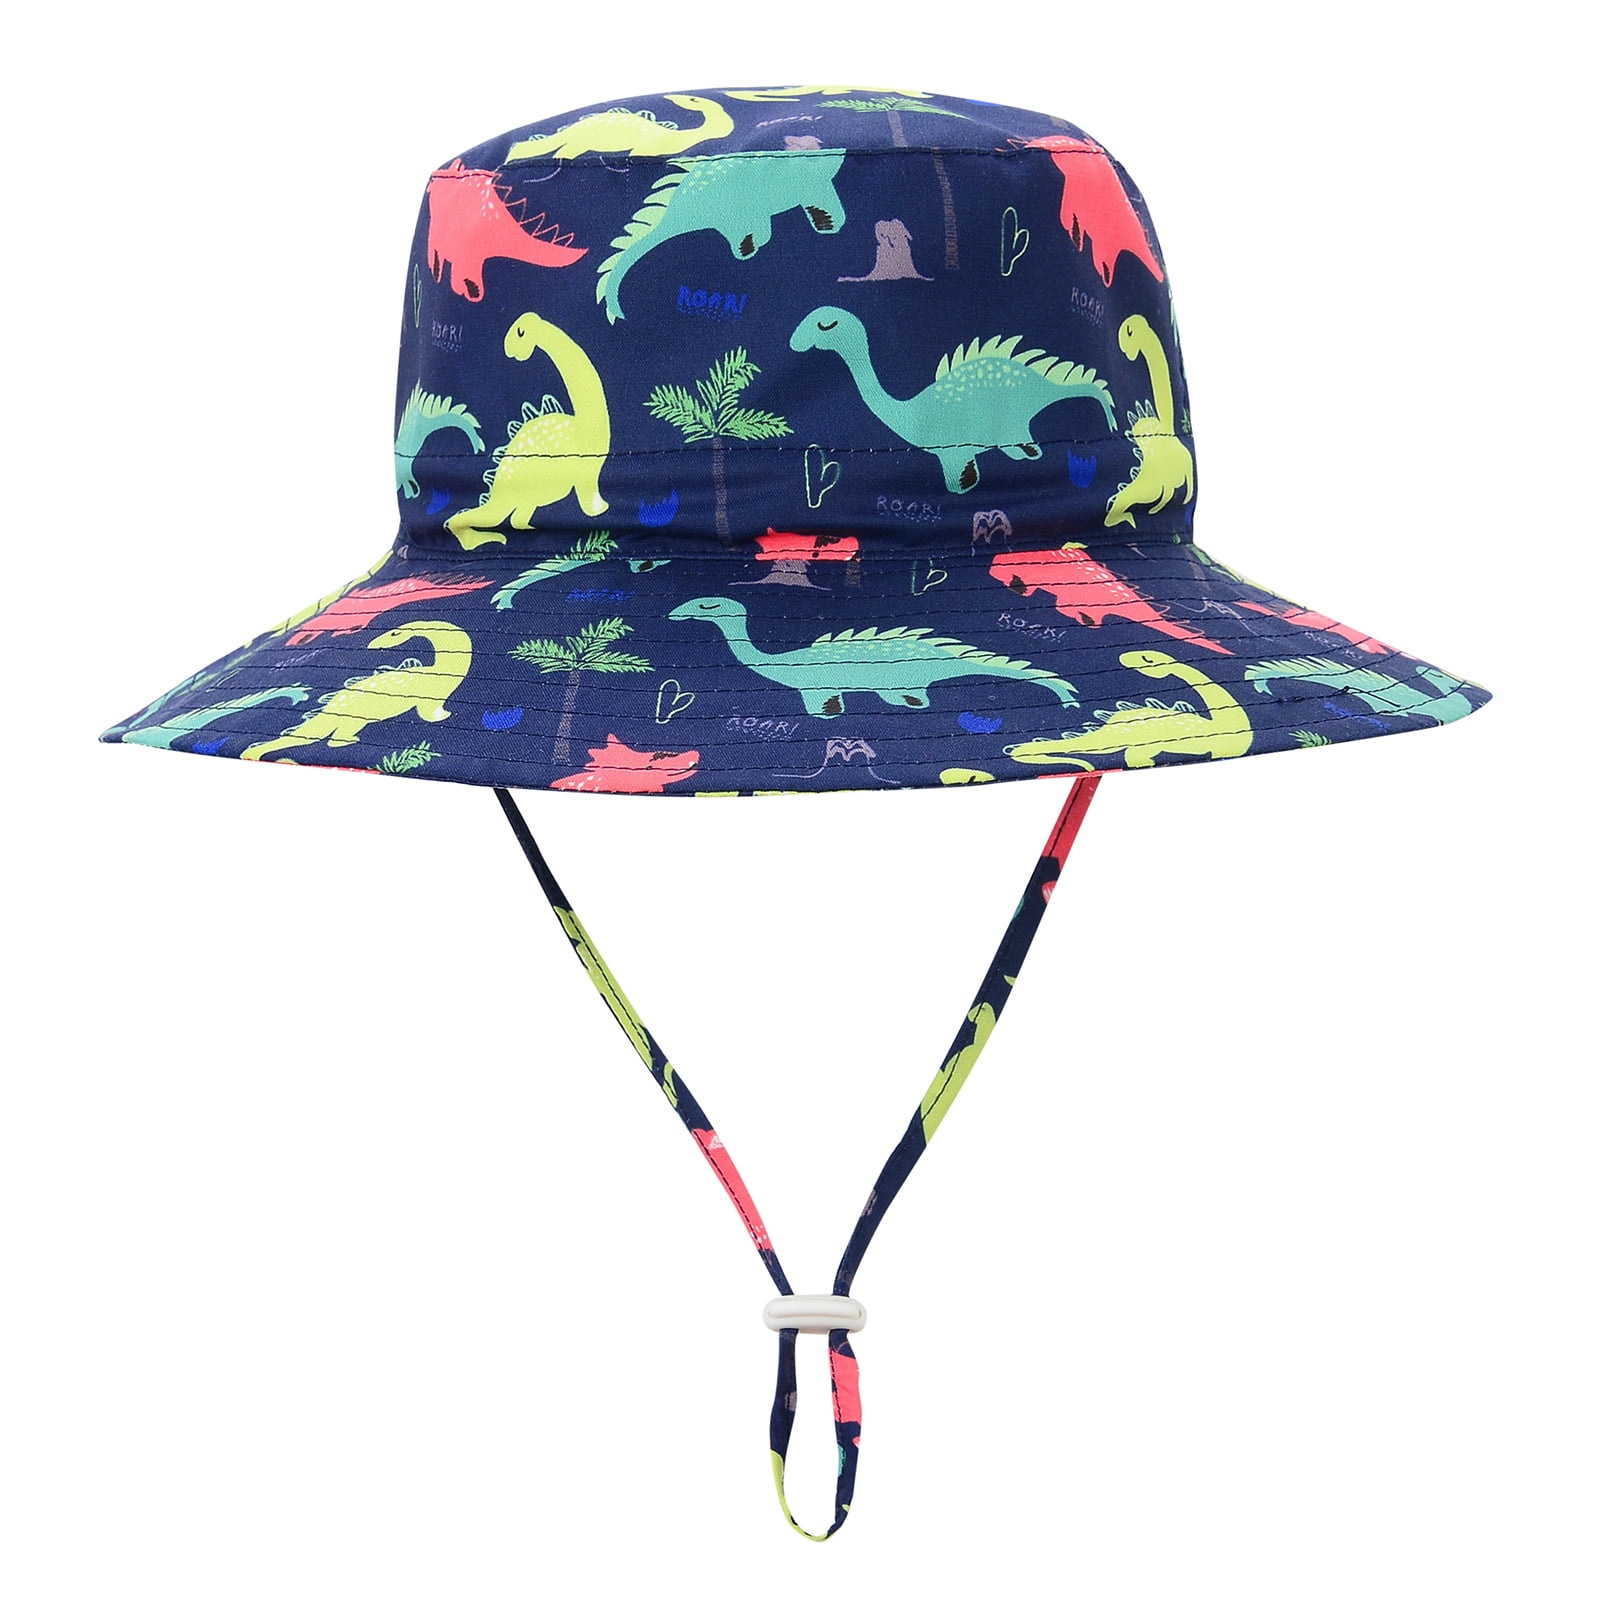 BRAND NEW LIGHT AIRY COLOURFUL BOY/TODDLER/BABY TIED SUMMER HAT/CAP 